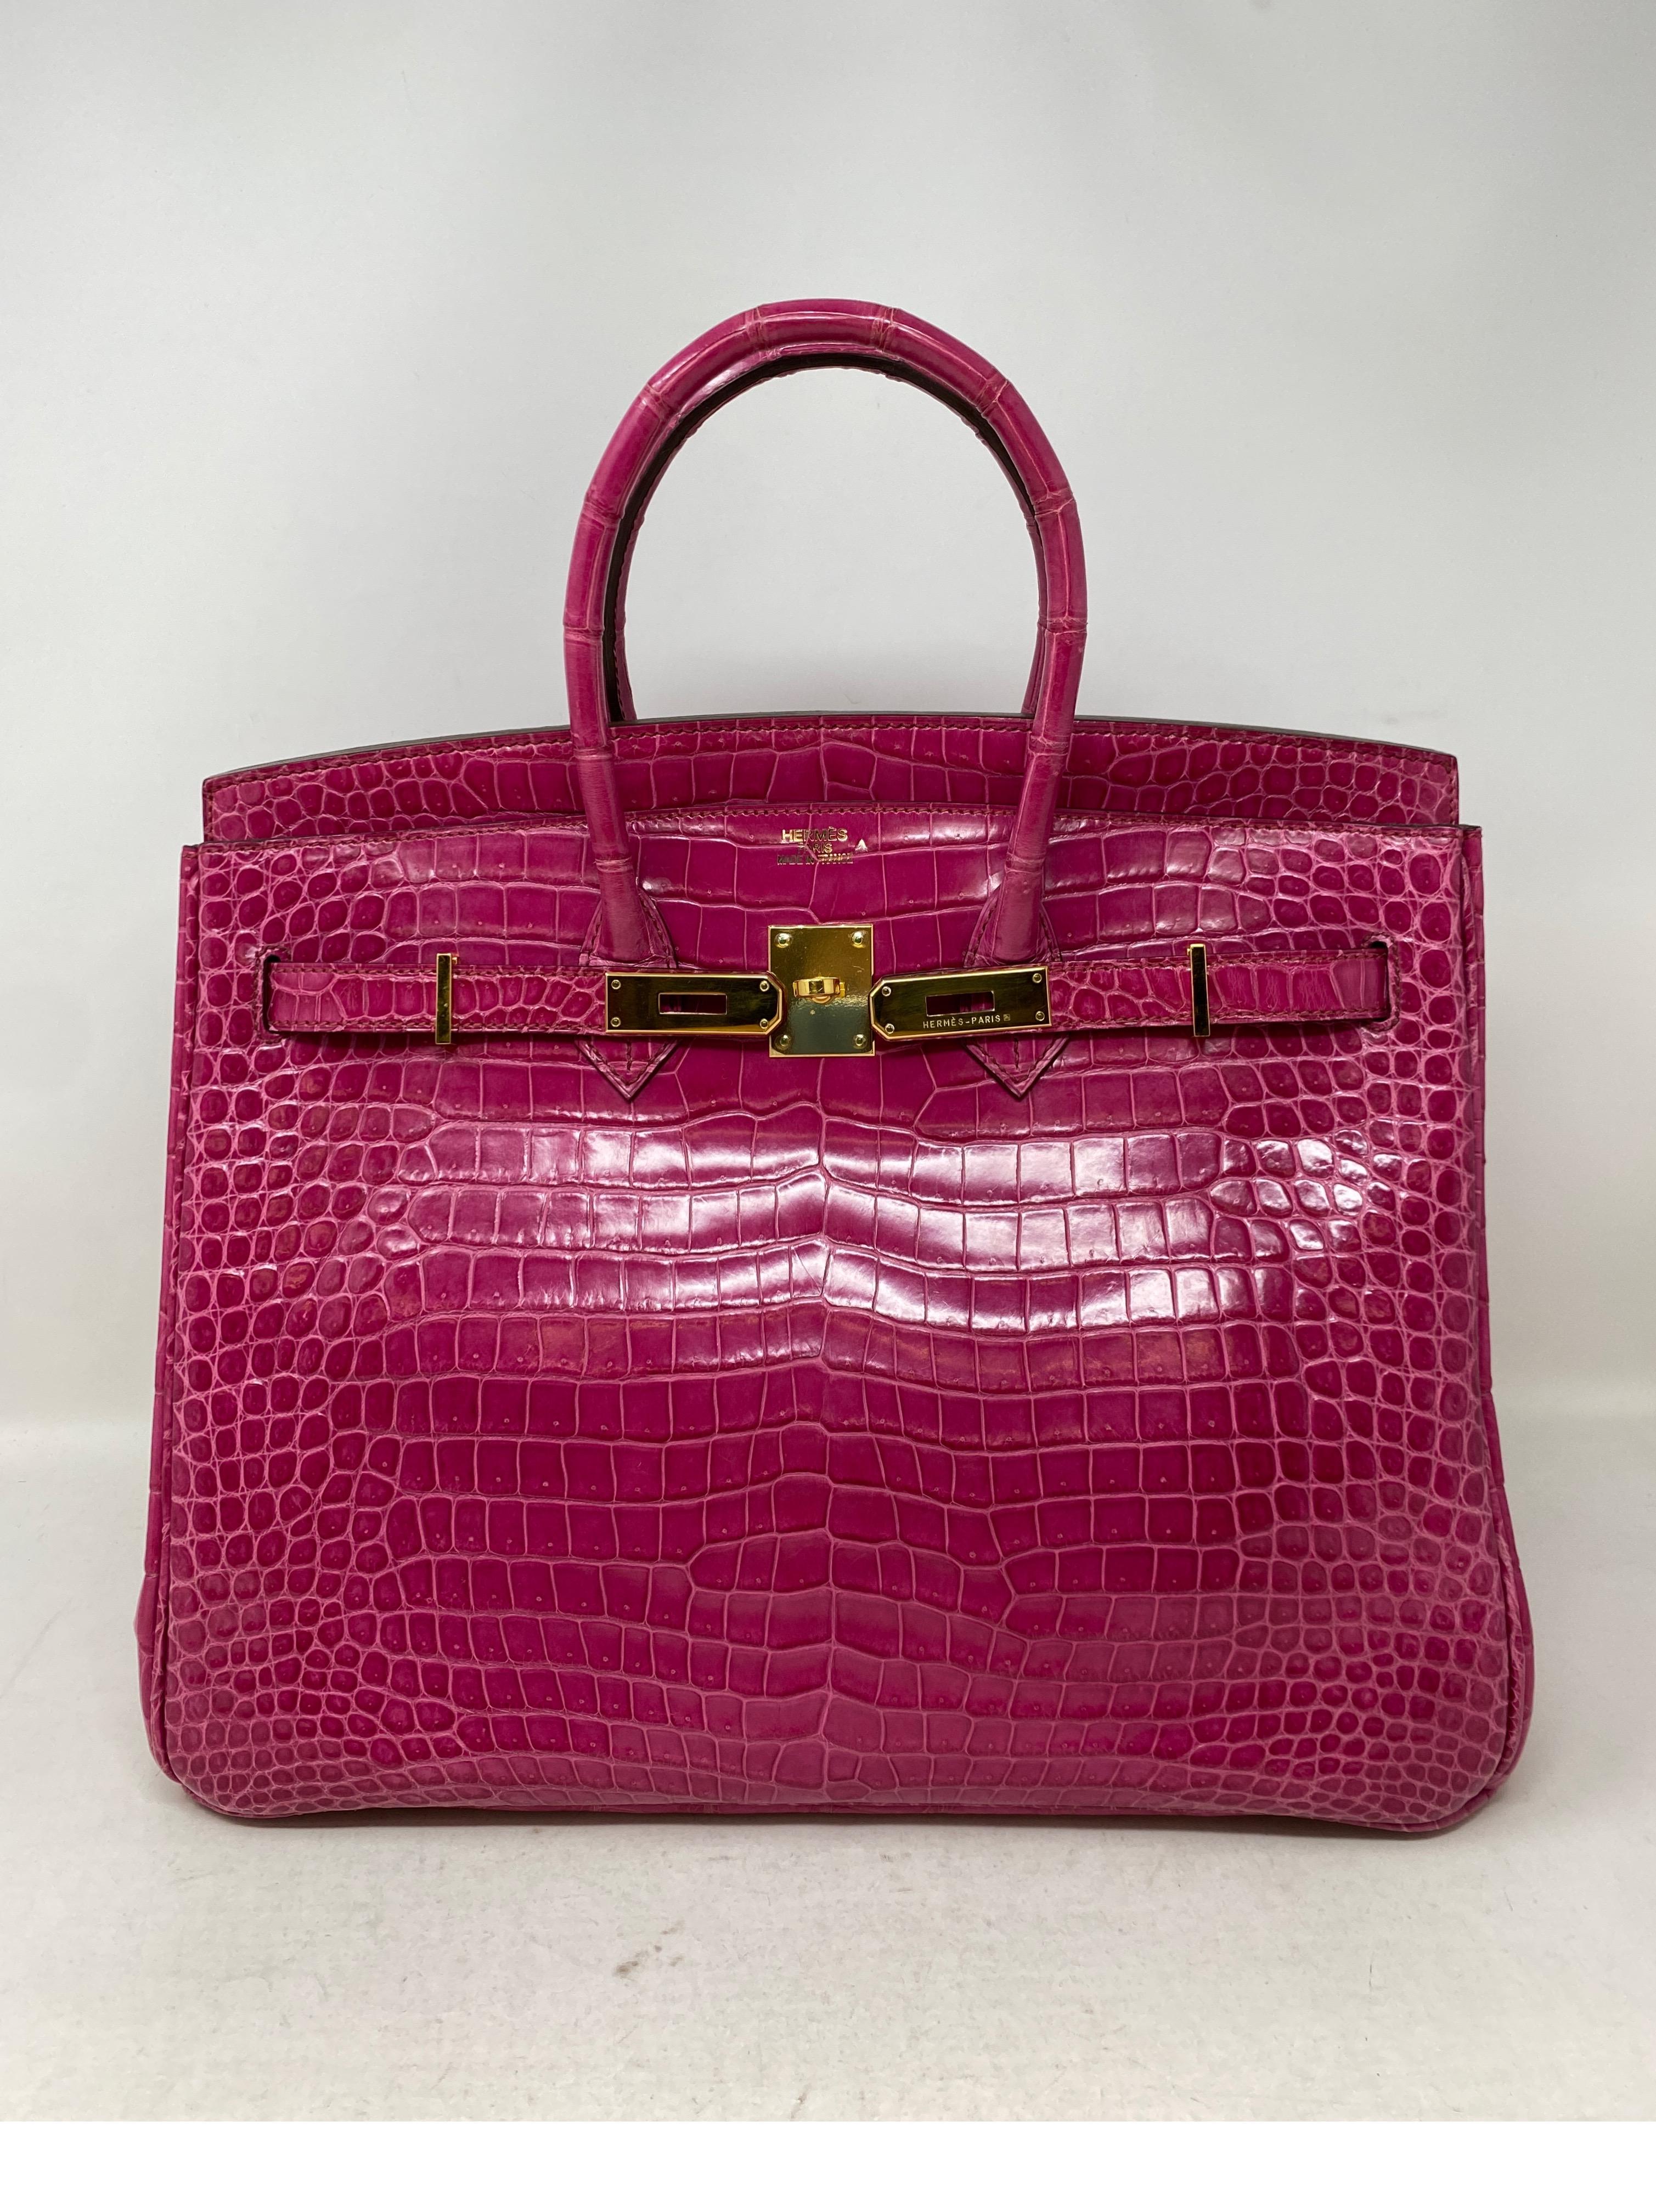 Hermes Fuschia Shiny Porosus Crocodile Birkin 35 Bag. Rare exotic crococodile bag. Gold hardware. Excellent condition. Like new. Interior is clean. all corners in excellent condition. Porosus crocodile is one of the most expensive exotics by Hermes.